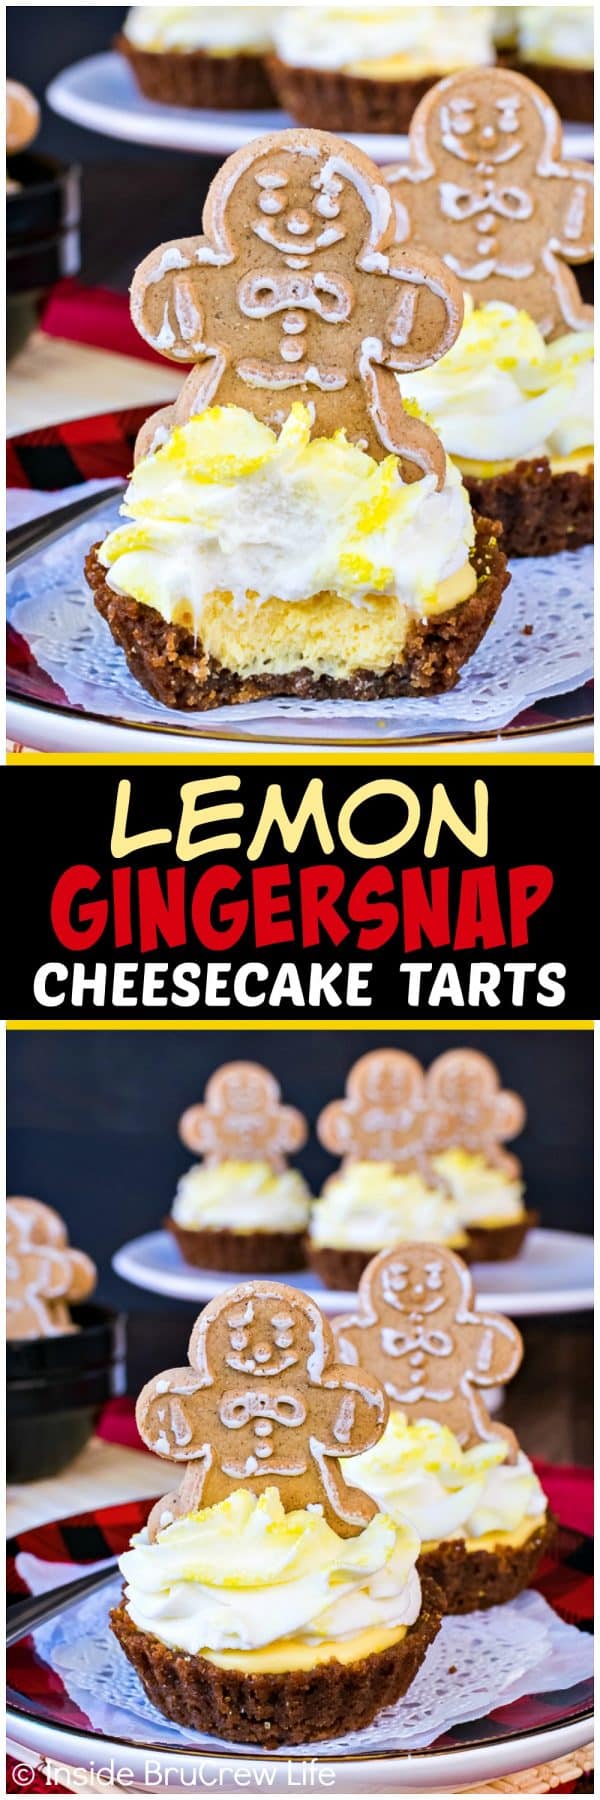 2 pictures of Lemon Gingersnap Cheesecake Tarts separated with a text box.